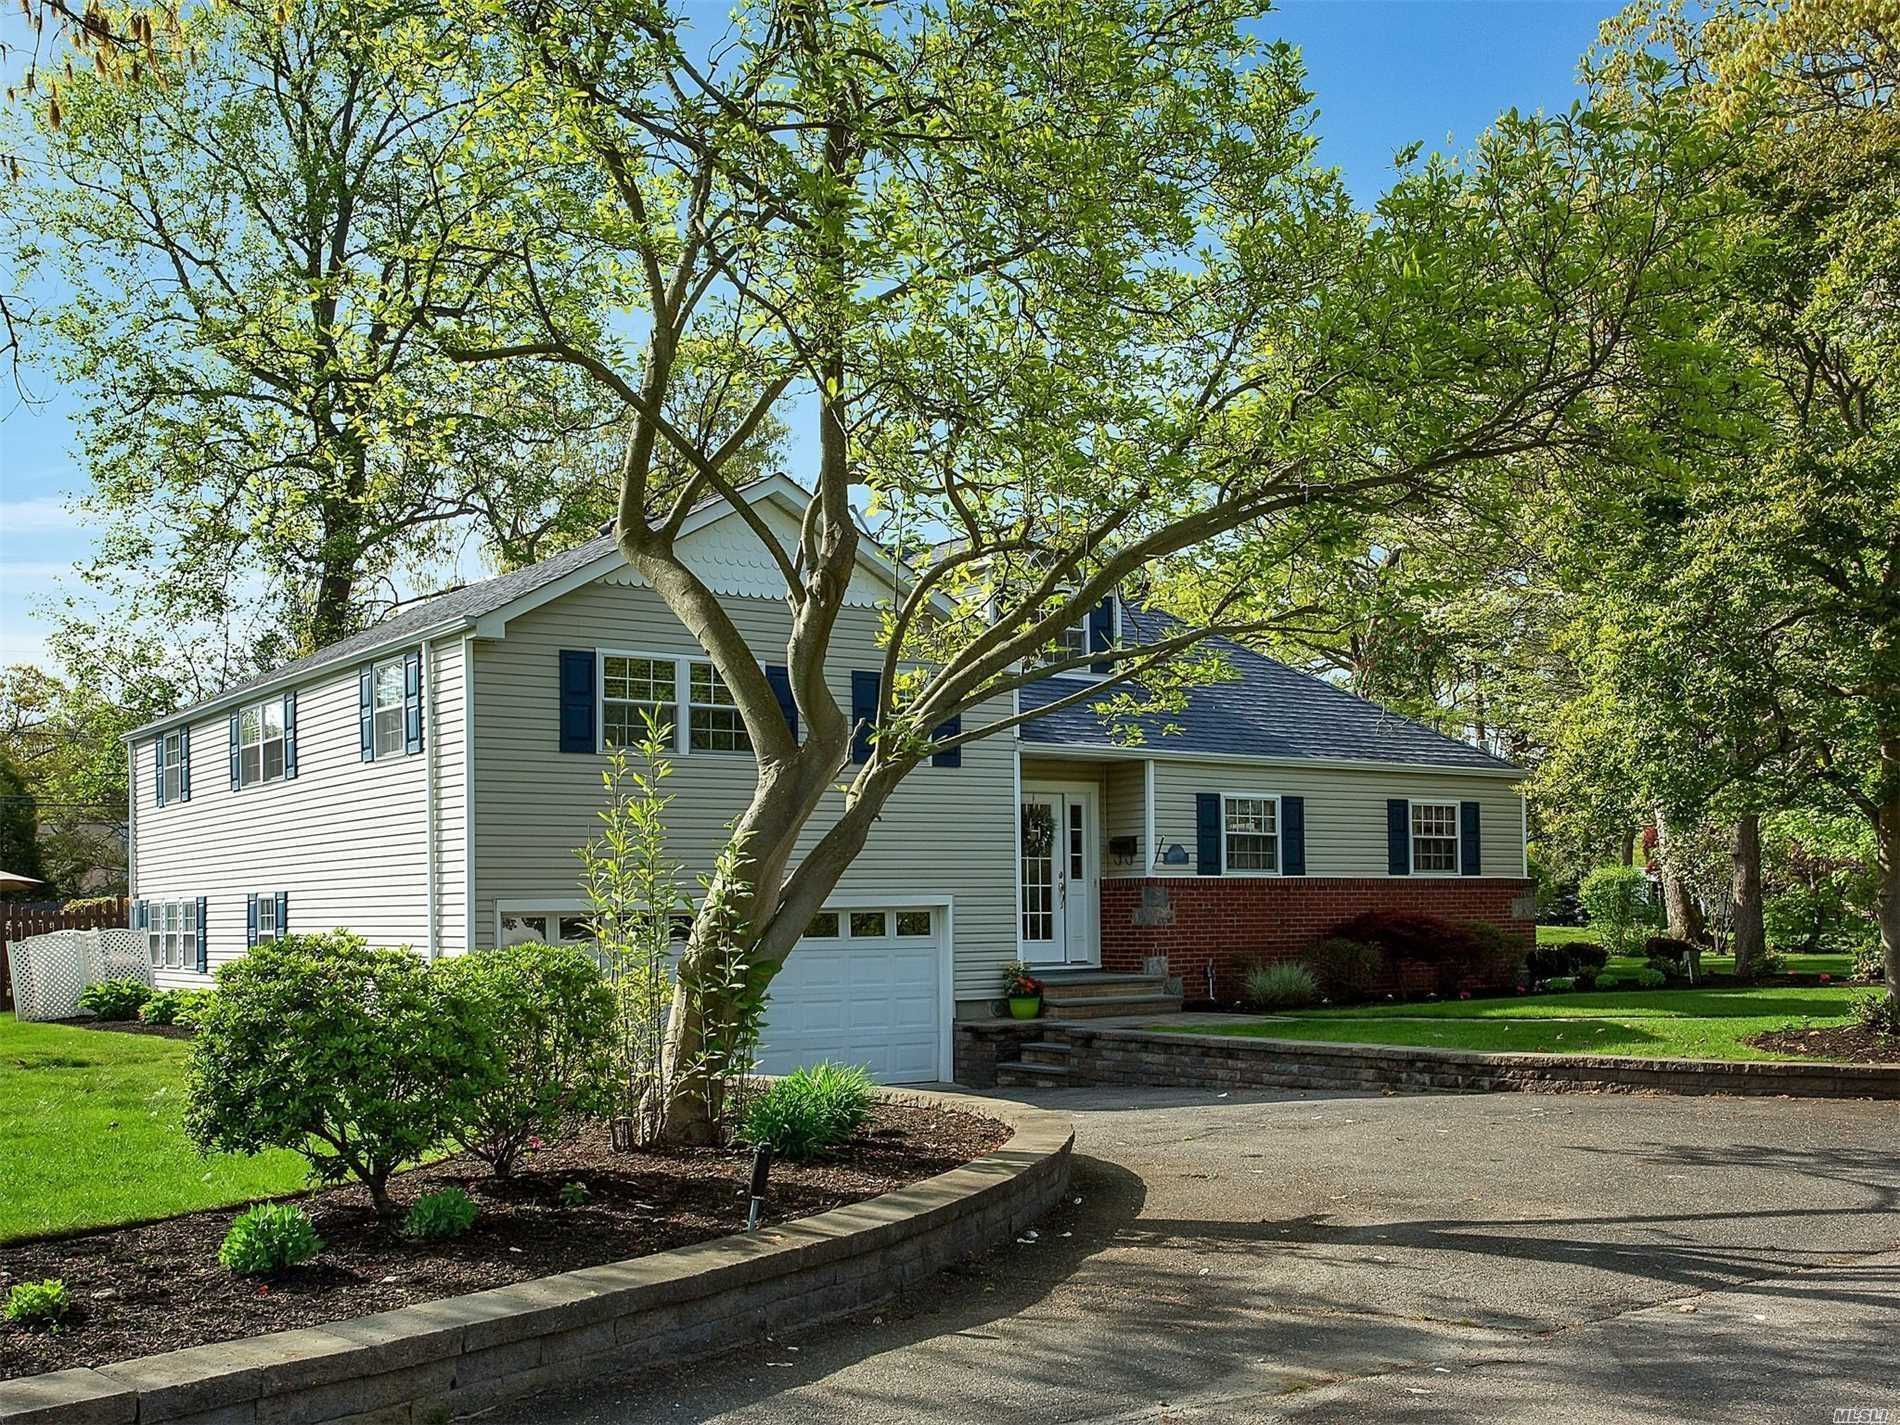 Enjoy Viewing This Renovated 4Bdrm, 2 Bth Custom Colonial. Huge Kitchen W High End Appliances. Open Layout . Beautiful Wood Flrs.  This Home Is Situated On A Beautiful Piece Of Property. The Back Yard Is Very Park Like And Great For Entertaining. This Property Comes With Associated Docking.